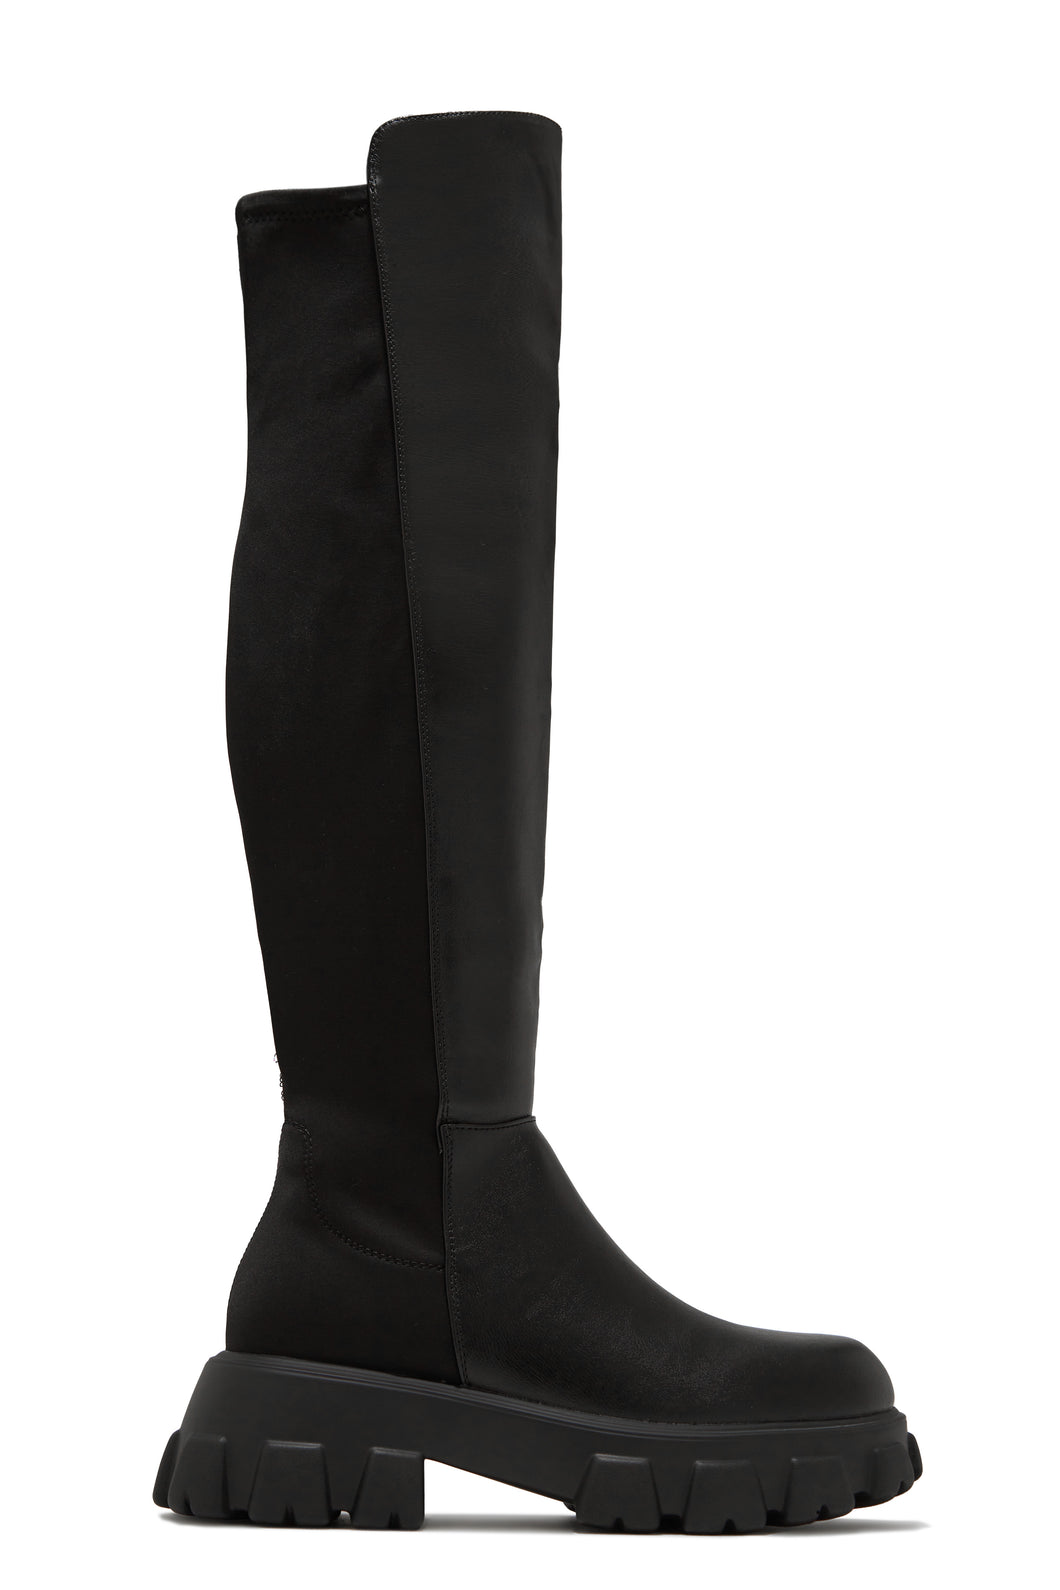 Miss Lola | Fall Outfit Black Over The Knee Flat Boots – MISS LOLA